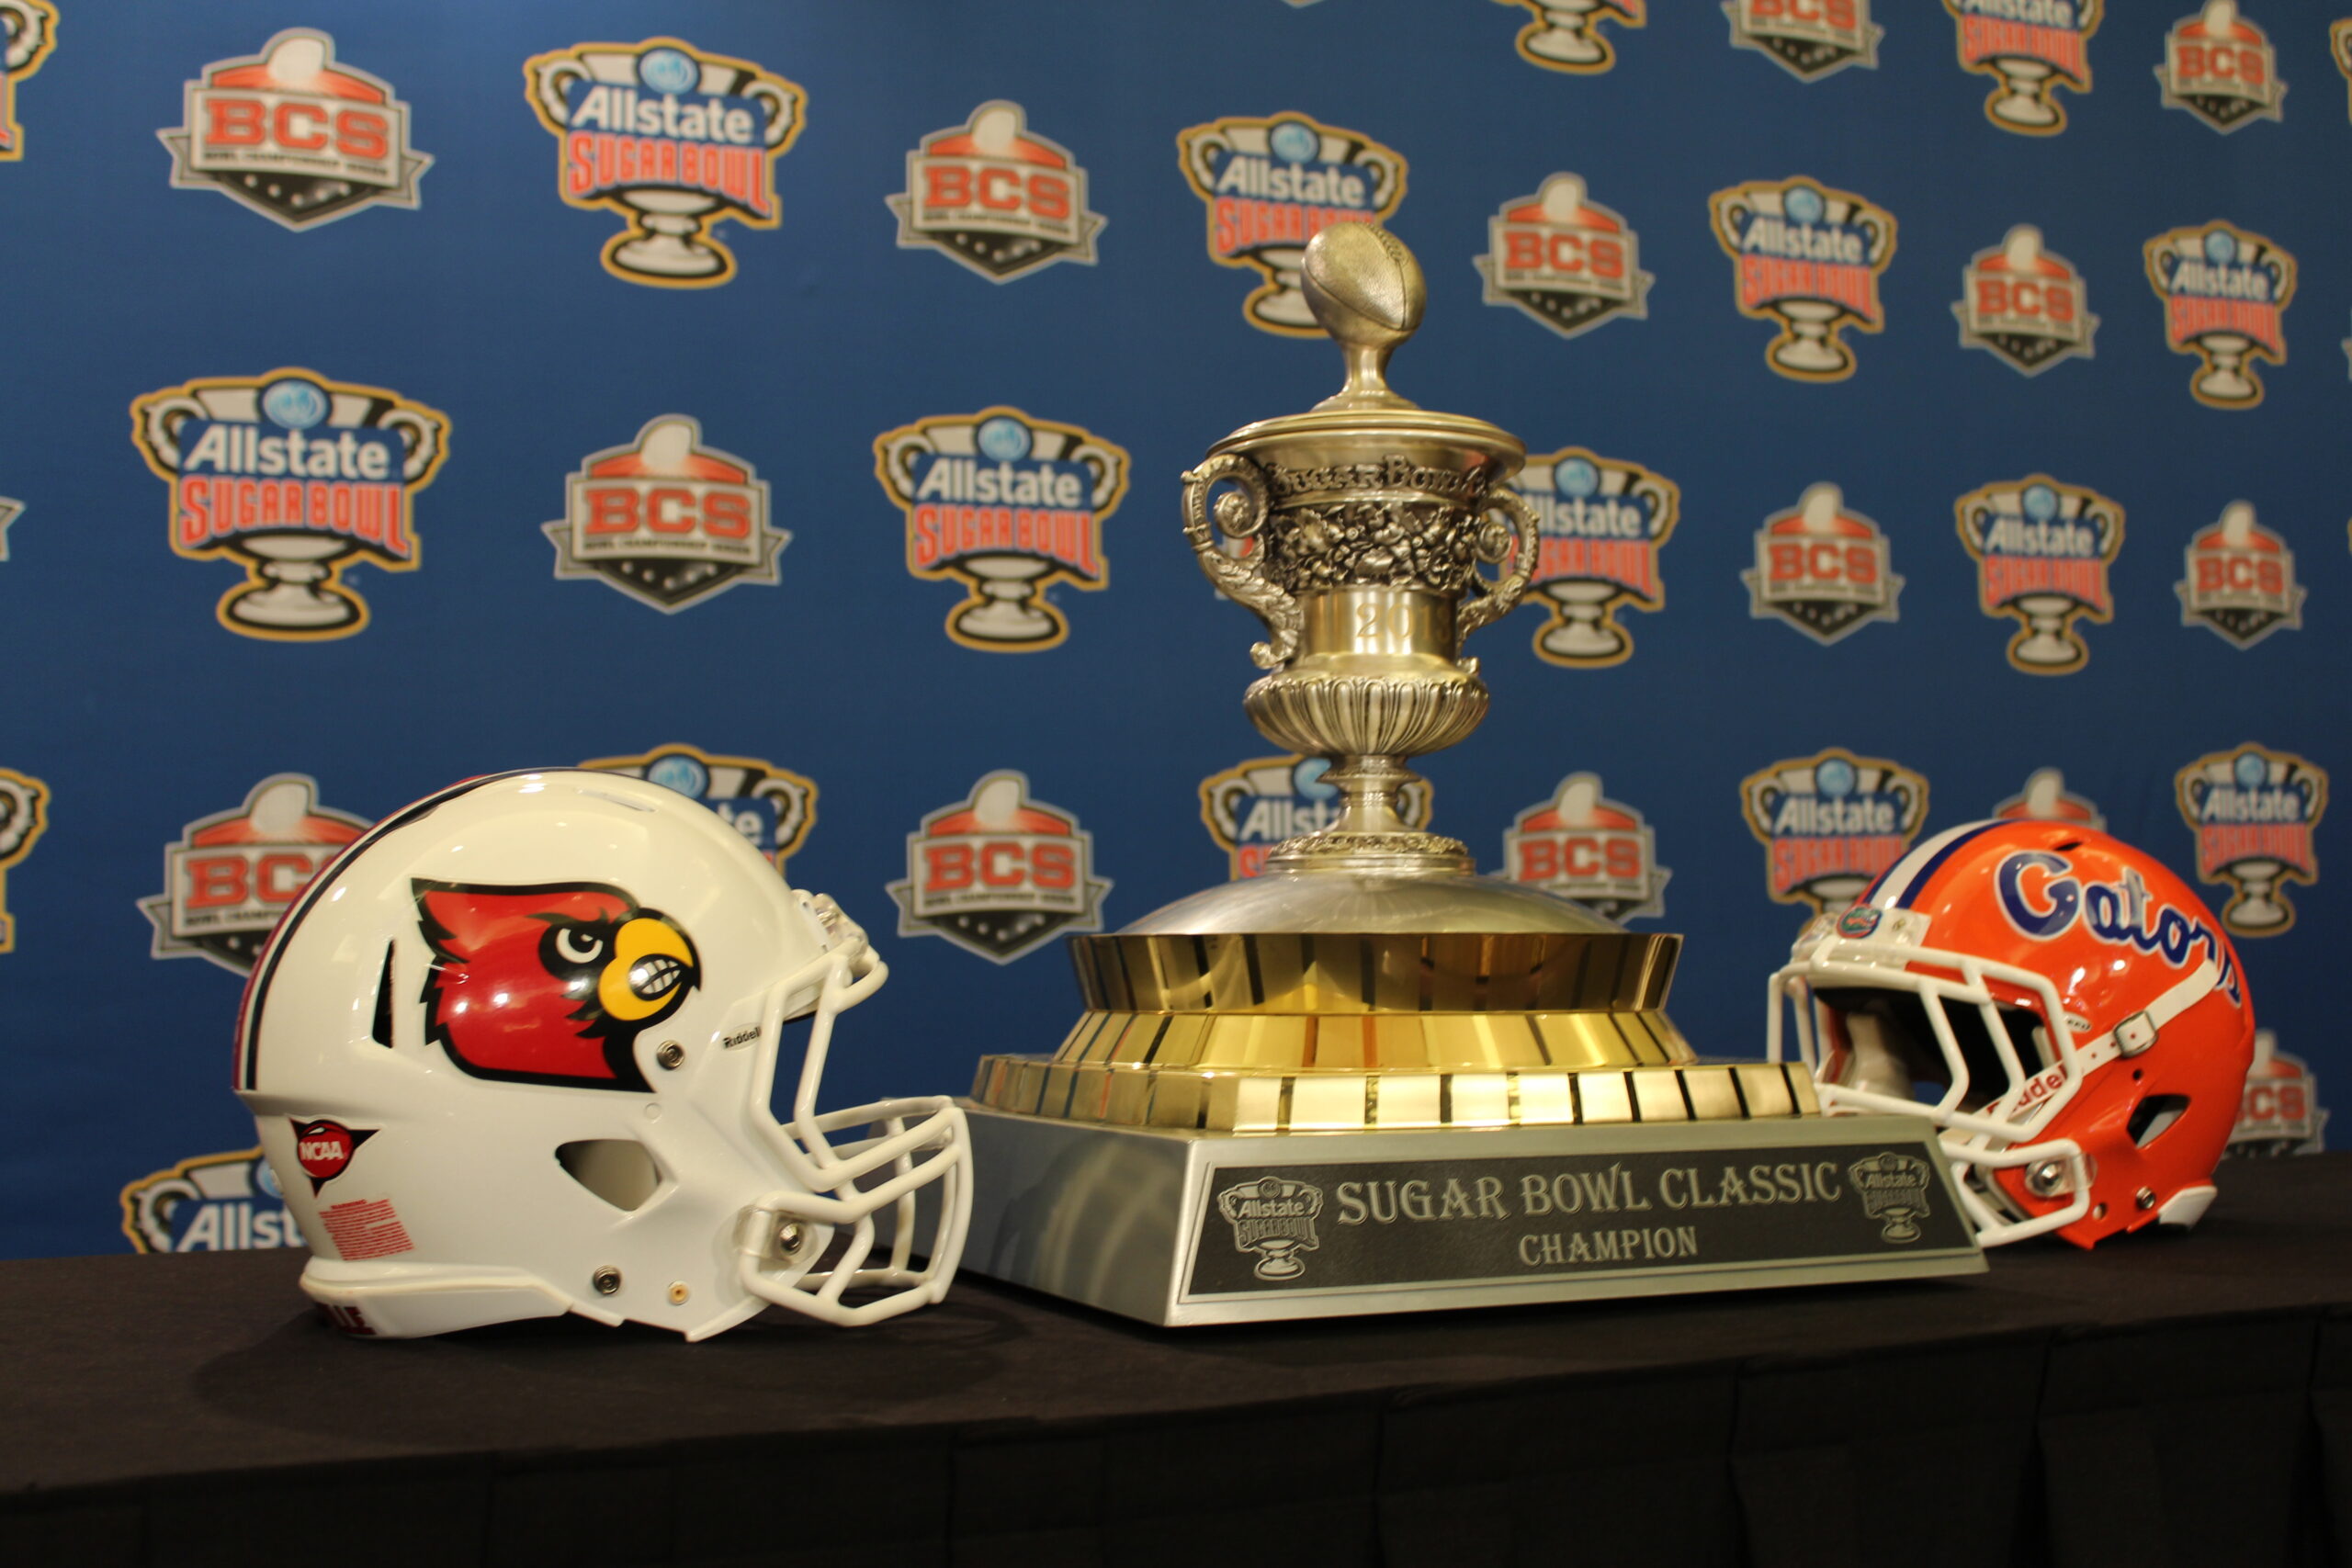 Louisville football: Legacy commitment does not sign